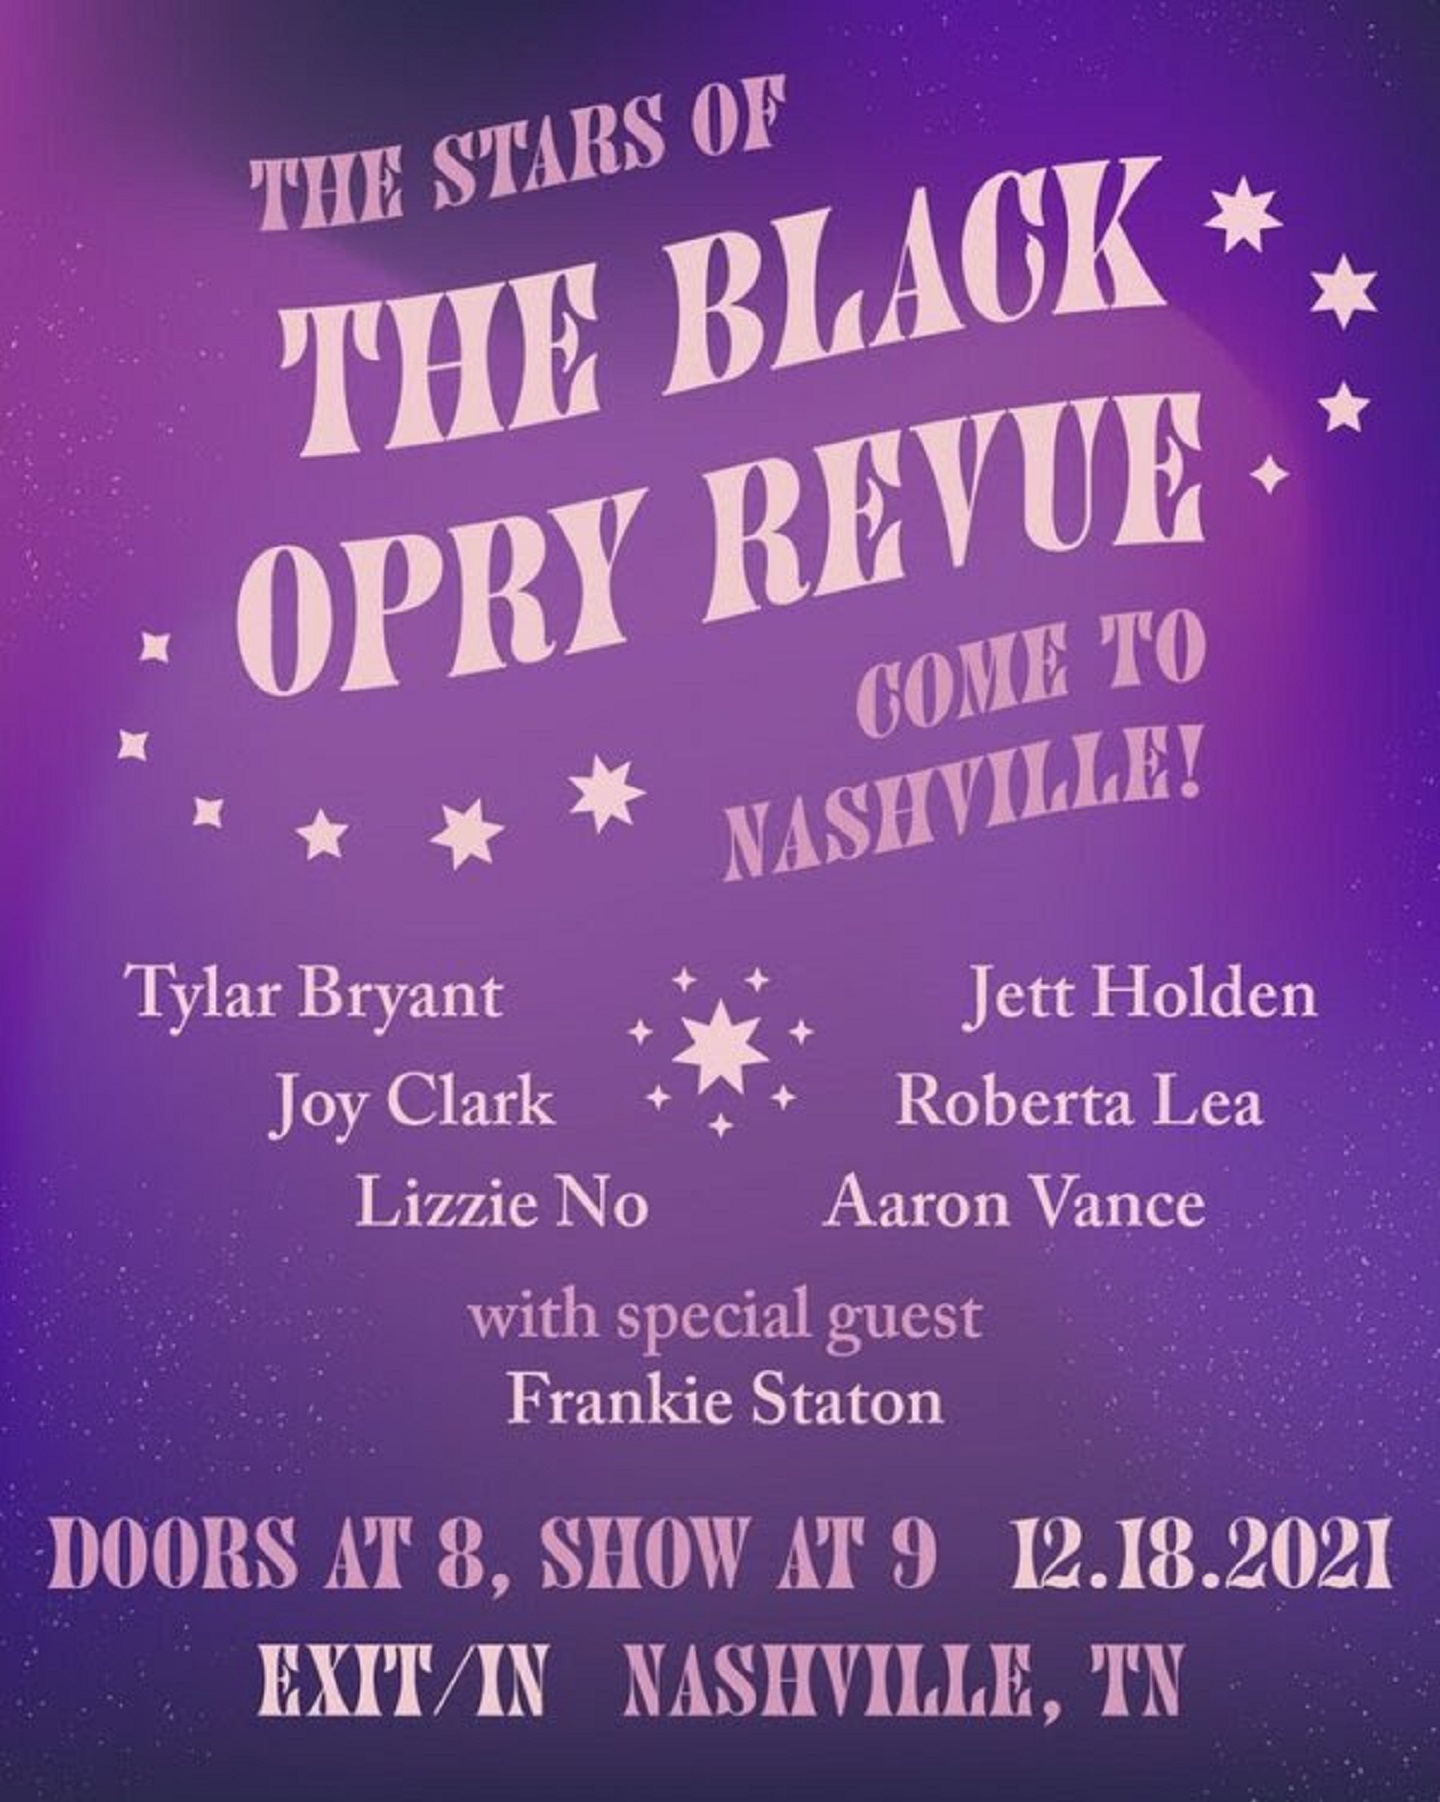 The Black Opry Revue Comes to Nashville's Exit/In